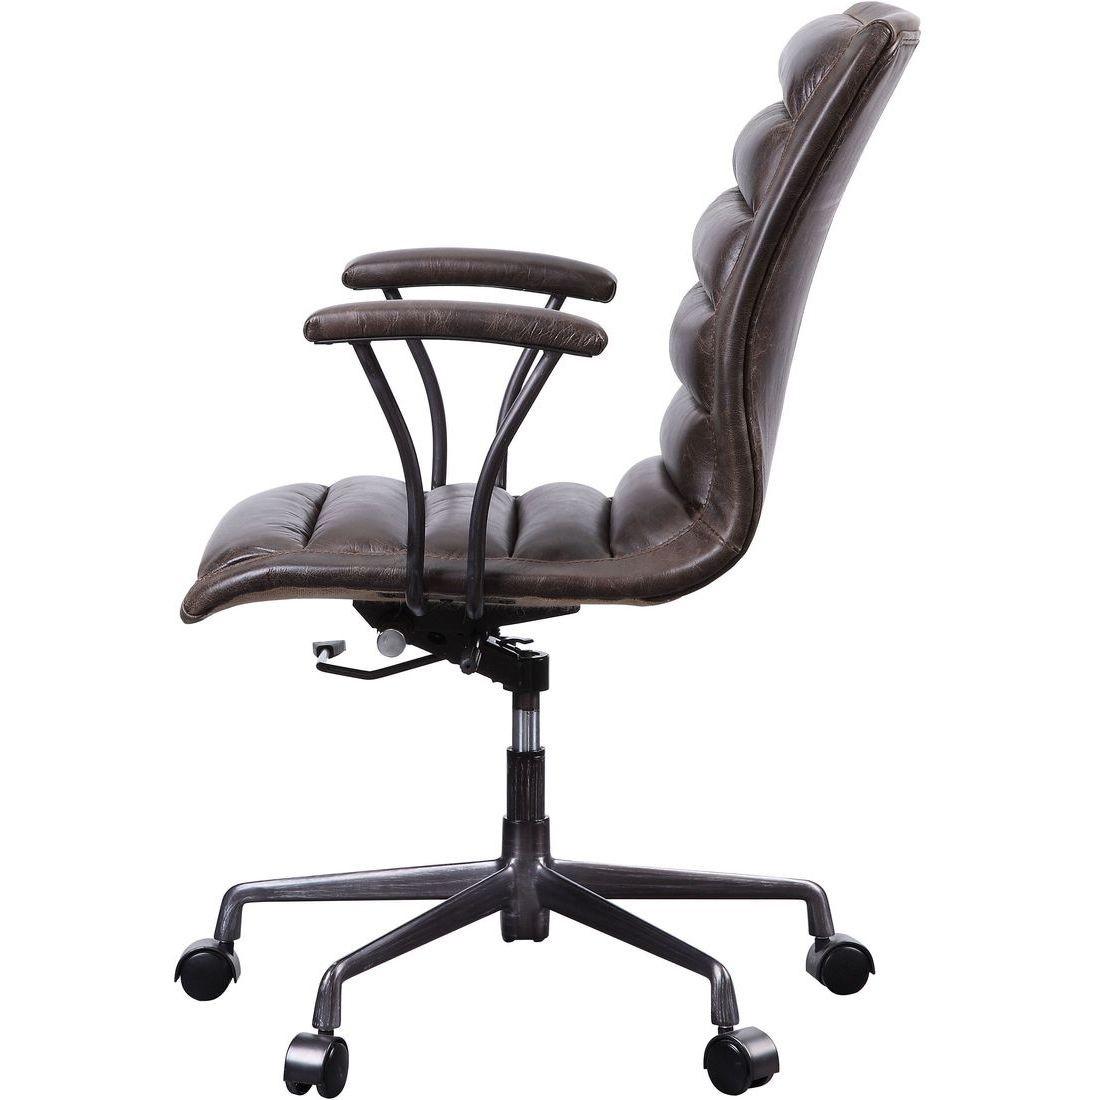 

    
Zooey 92558 Acme Furniture Executive Chair
